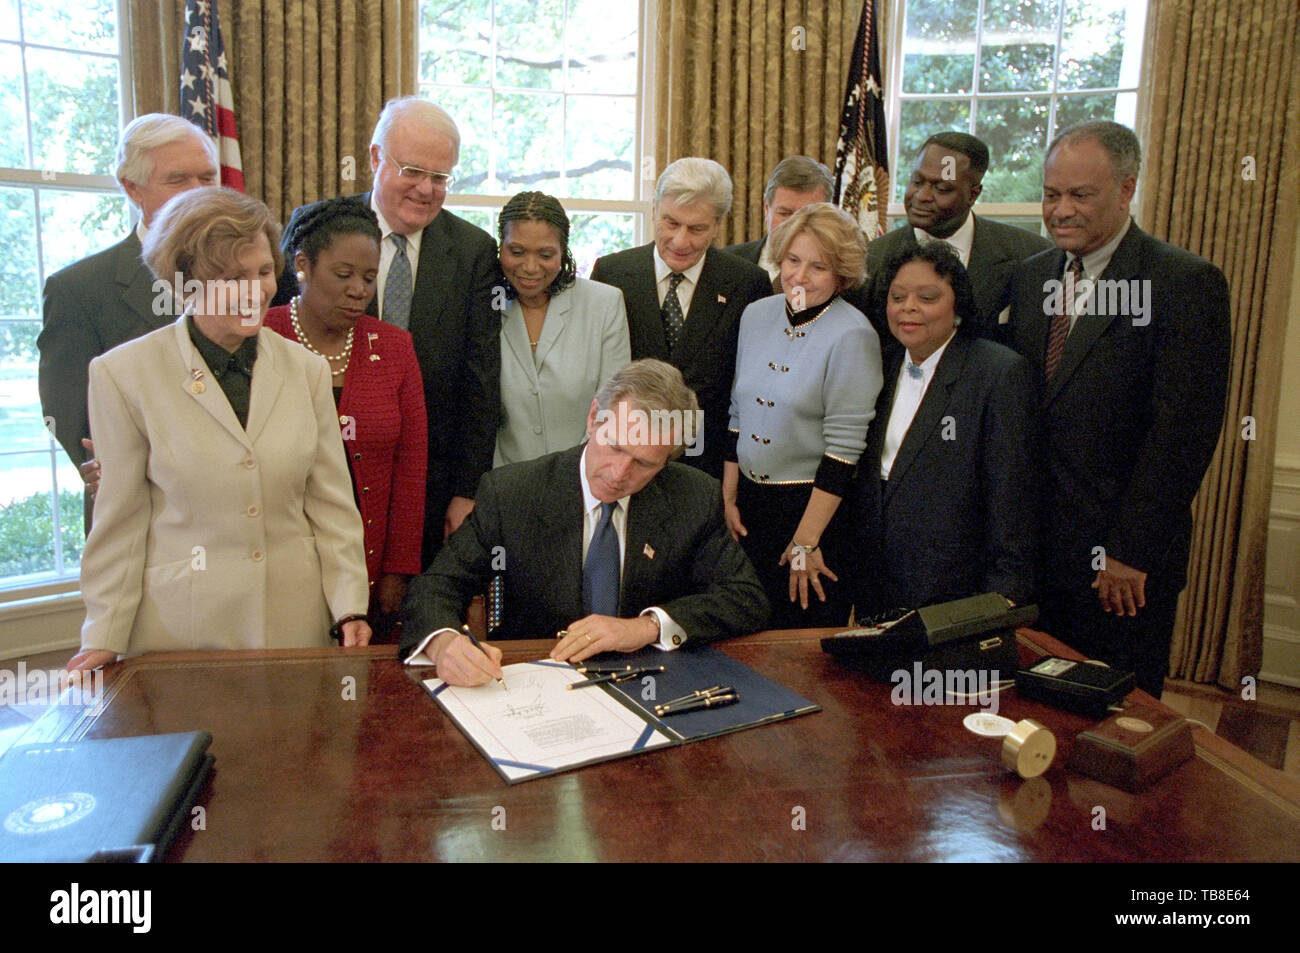 United States President George W. Bush signs the Notification and Federal Employee Anti-discrimination and Retaliation Act in the Oval Office of the White House in Washington, DC, May 15, 2002. Called the 'No Fear' Act, the legislation fights discrimination and retaliation in federal agencies. Standing with the President, from left to right, are: US Representative Connie Morrella (Republican of Maryland; US Senator Thad Cochran (Republican of Mississippi); US Representative Sheila Jackson Lee (Democrat of Texas); US Representative Jim Sensenbrenner (Republican of Wisconsin); Dr. Marsha Coleman Stock Photo